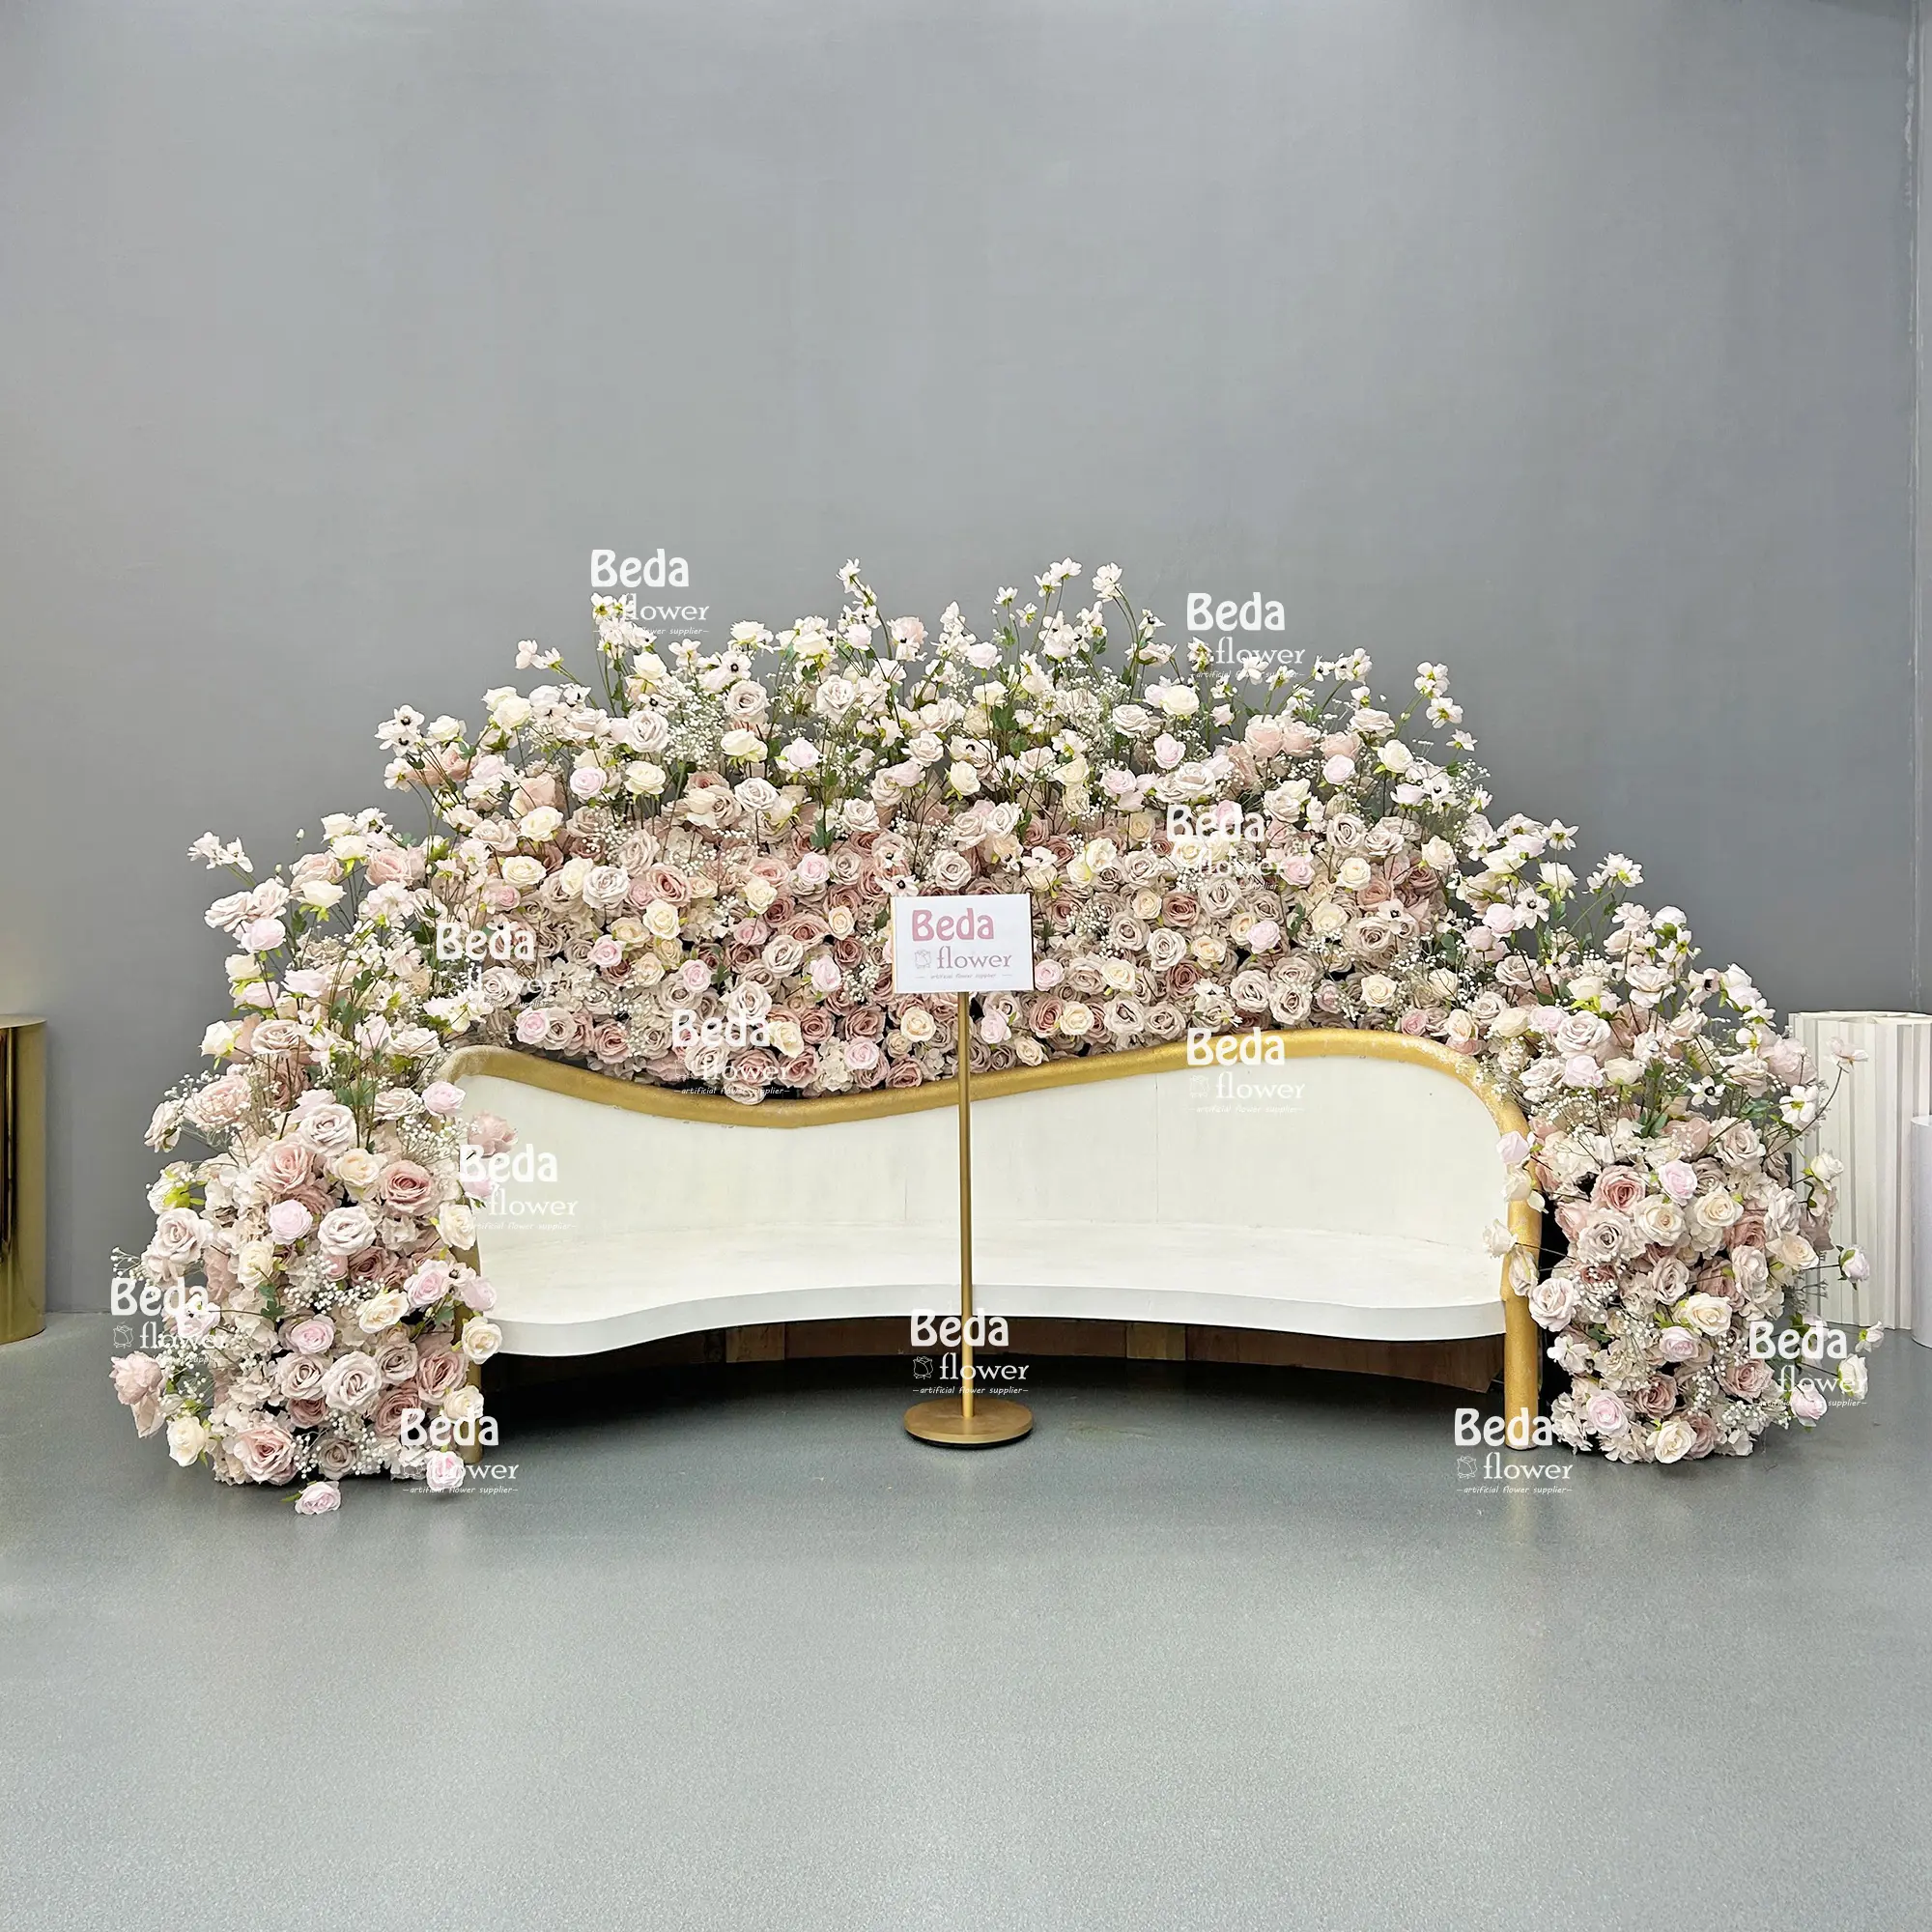 Beda Customized High-Quality Material Process Design Artificial Background Runner Wedding and Home Decoration Flower Runner